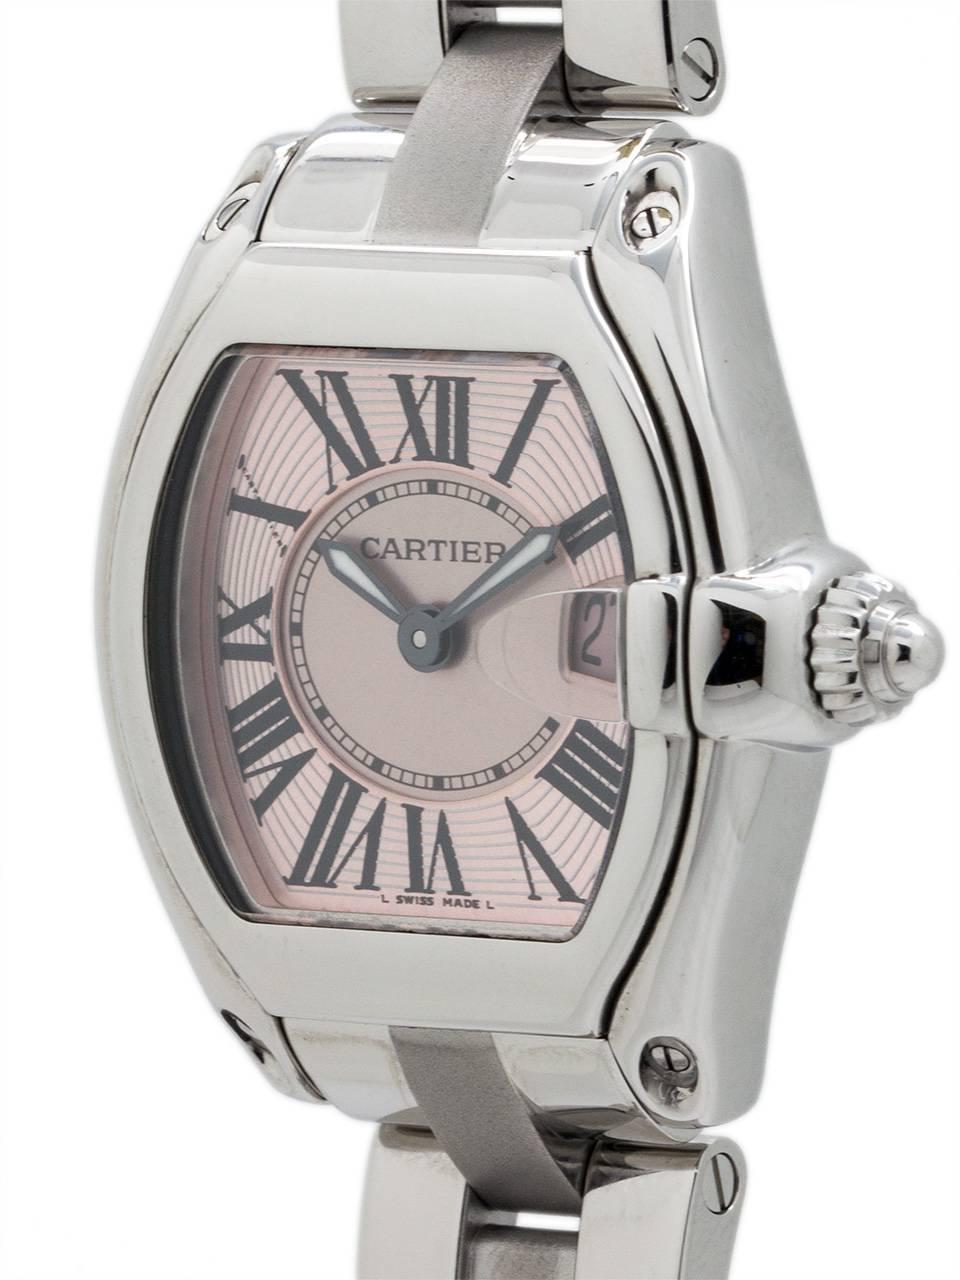 
Cartier lady Roadster Breast Cancer limited edition circa 2008. Featuring 31 x 37mm toneau shaped case with sapphire crystal and date at 3 o’clock. With classic stretch Roman figures dial, with 2 tone pink dial with inner breast cancer ribbon